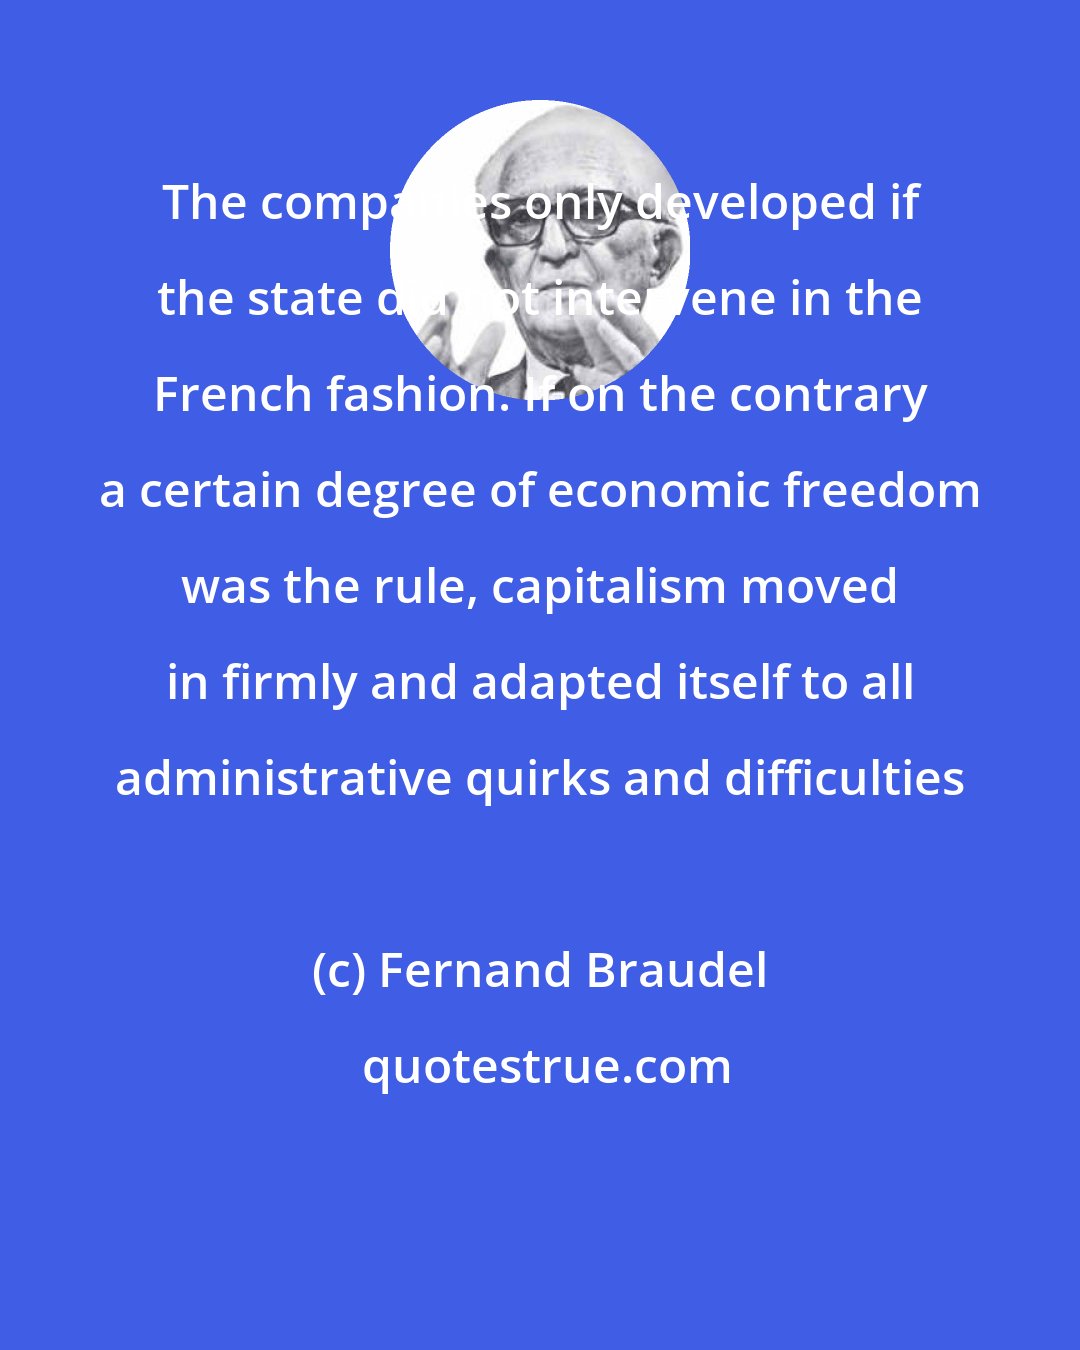 Fernand Braudel: The companies only developed if the state did not intervene in the French fashion. If on the contrary a certain degree of economic freedom was the rule, capitalism moved in firmly and adapted itself to all administrative quirks and difficulties